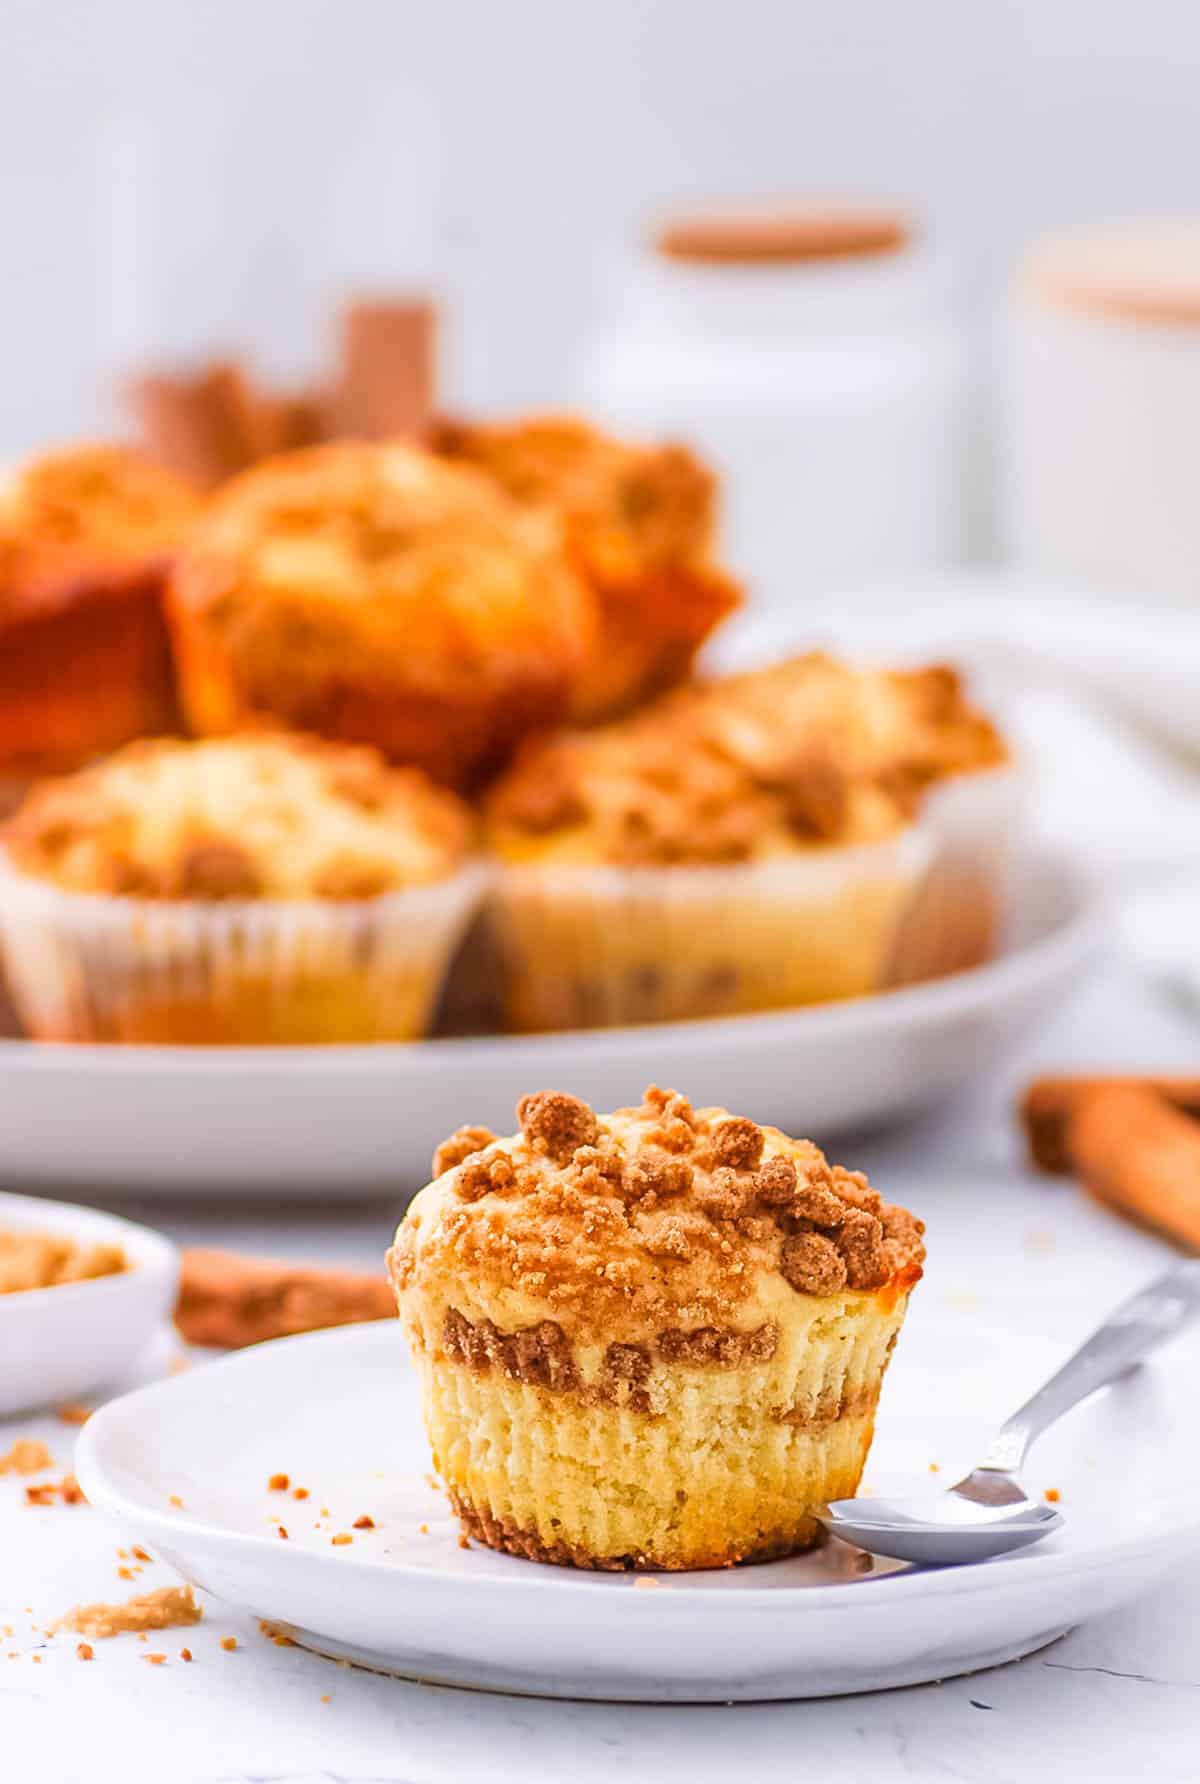 Cinnamon streusel muffin served on a white plate, with a bunch of baked cinnamon muffins with streusel topping in the background.